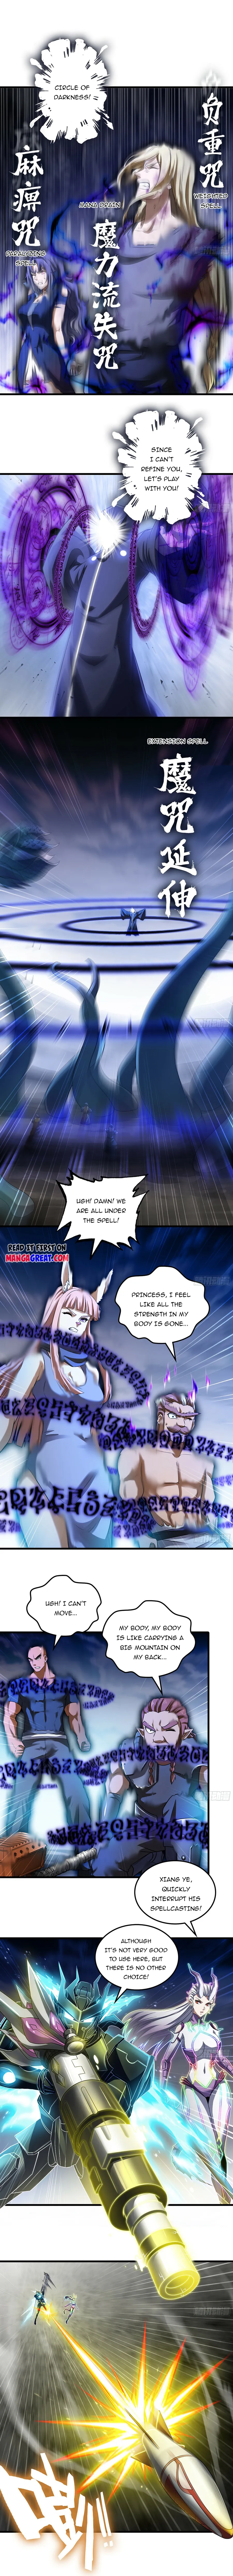 My Wife is a Demon Queen chapter 442 page 3